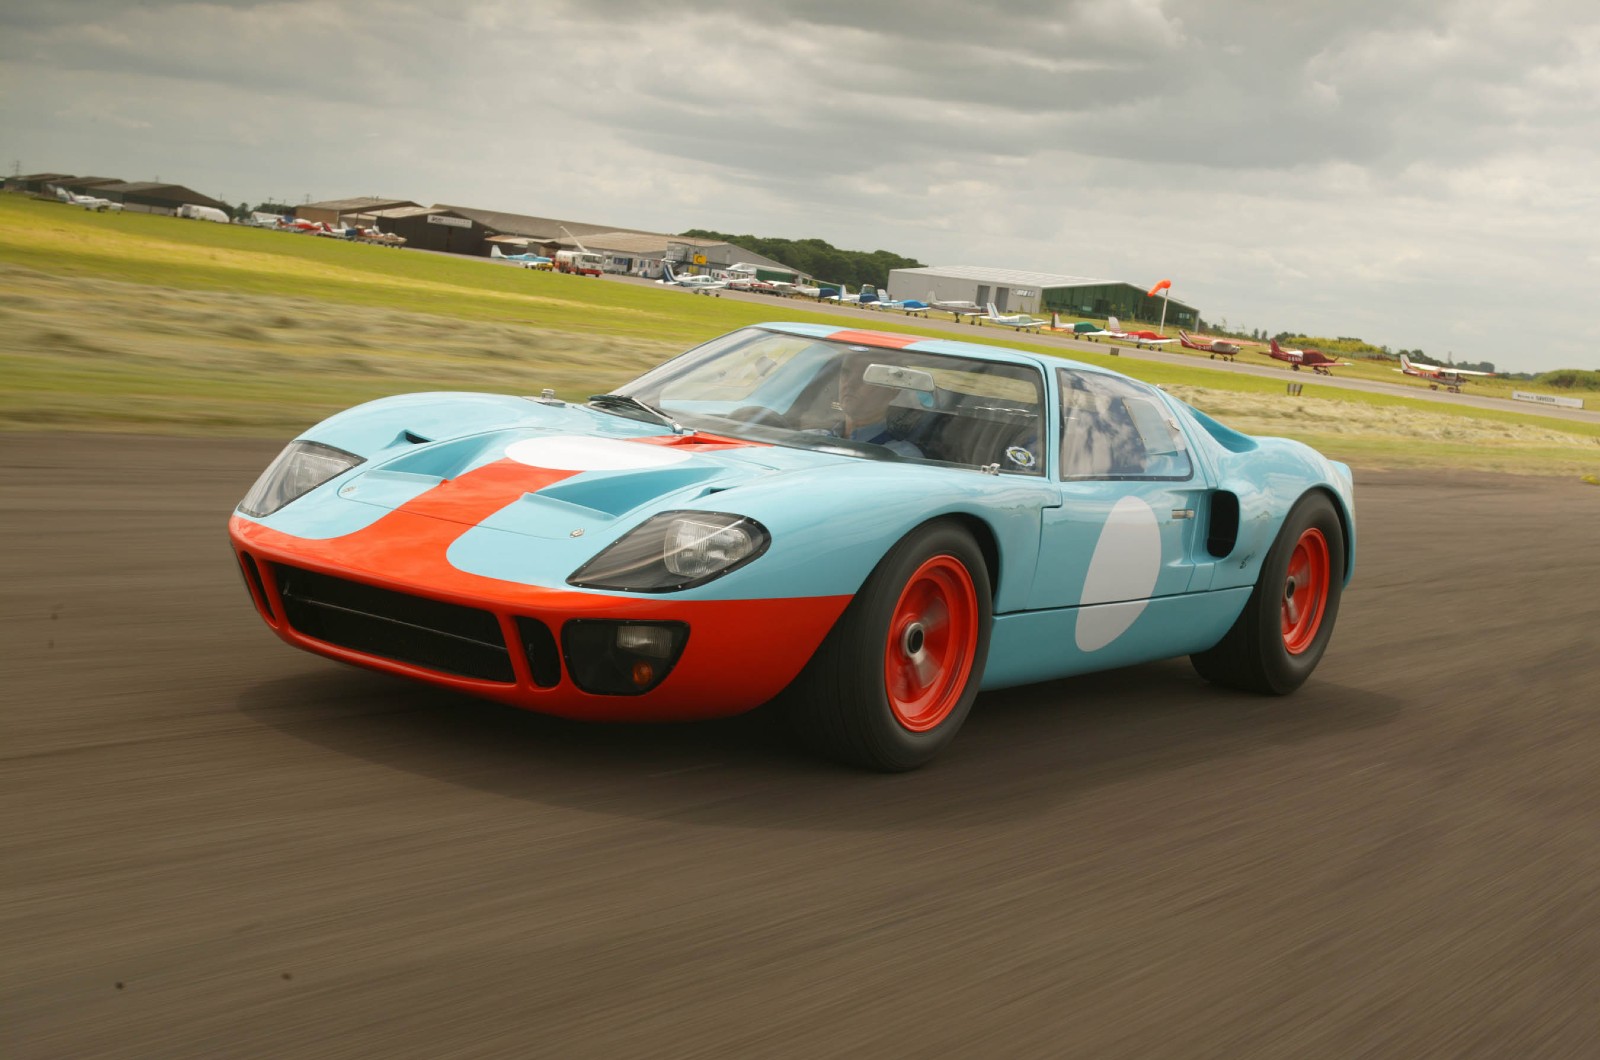 <p>The origins of the GT40 are about as legendary as the car itself. Born out of the most infamous grudge in motoring history, development of the GT40 began after failed negotiations by Ford to purchase Ferrari.</p><p>Powered by a Ford Fairlane-sourced 4.2-liter V8 aluminum block engine, the GT40’s groundbreaking design also included an advanced suspension system calibrated through early computer programming, which was unheard of at the time. In the end, Ford was successful in breaking Ferrari’s dominance in endurance racing. The GT40 achieved a remarkable four year winning streak at the 24 Hours of Le Mans from 1966 to 1969, demonstrating the capacity of American automakers to produce high-performance, championship-winning sports cars.</p>